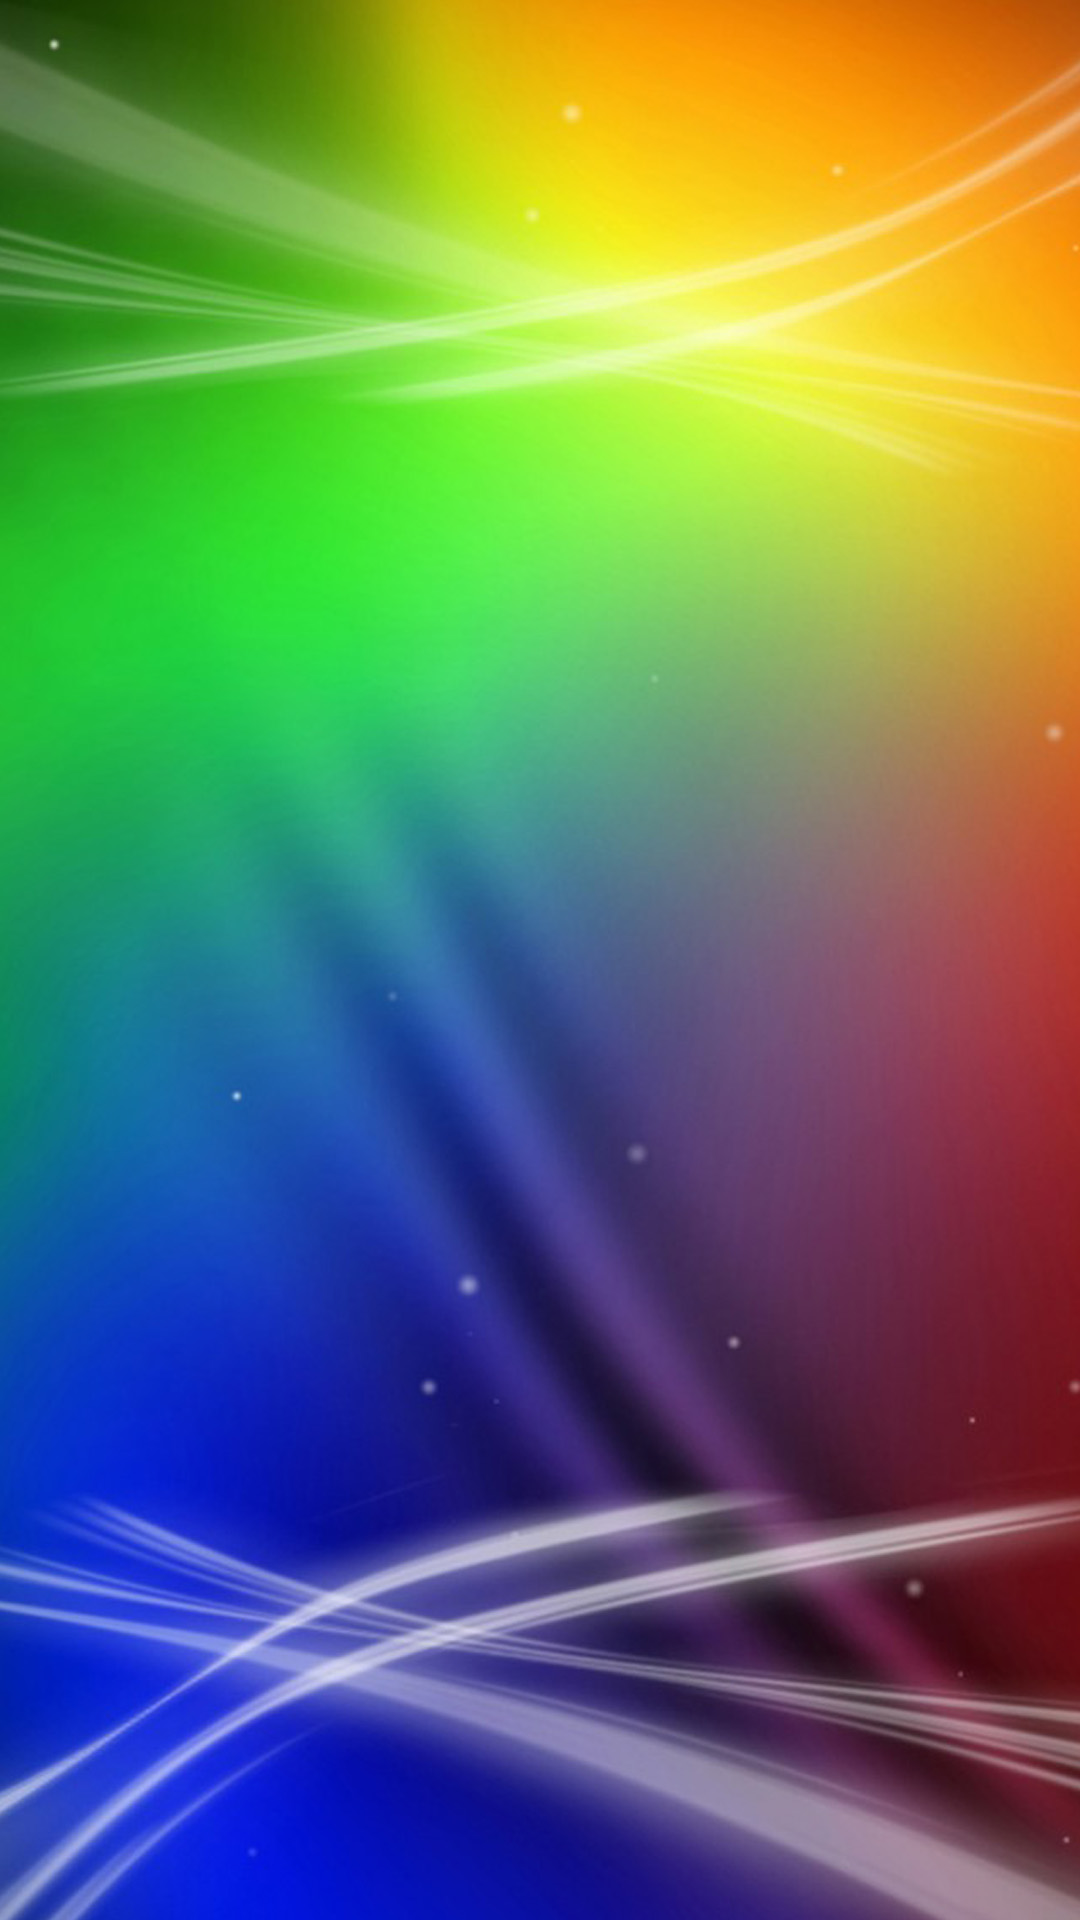 Colorful 180 Android wallpaper